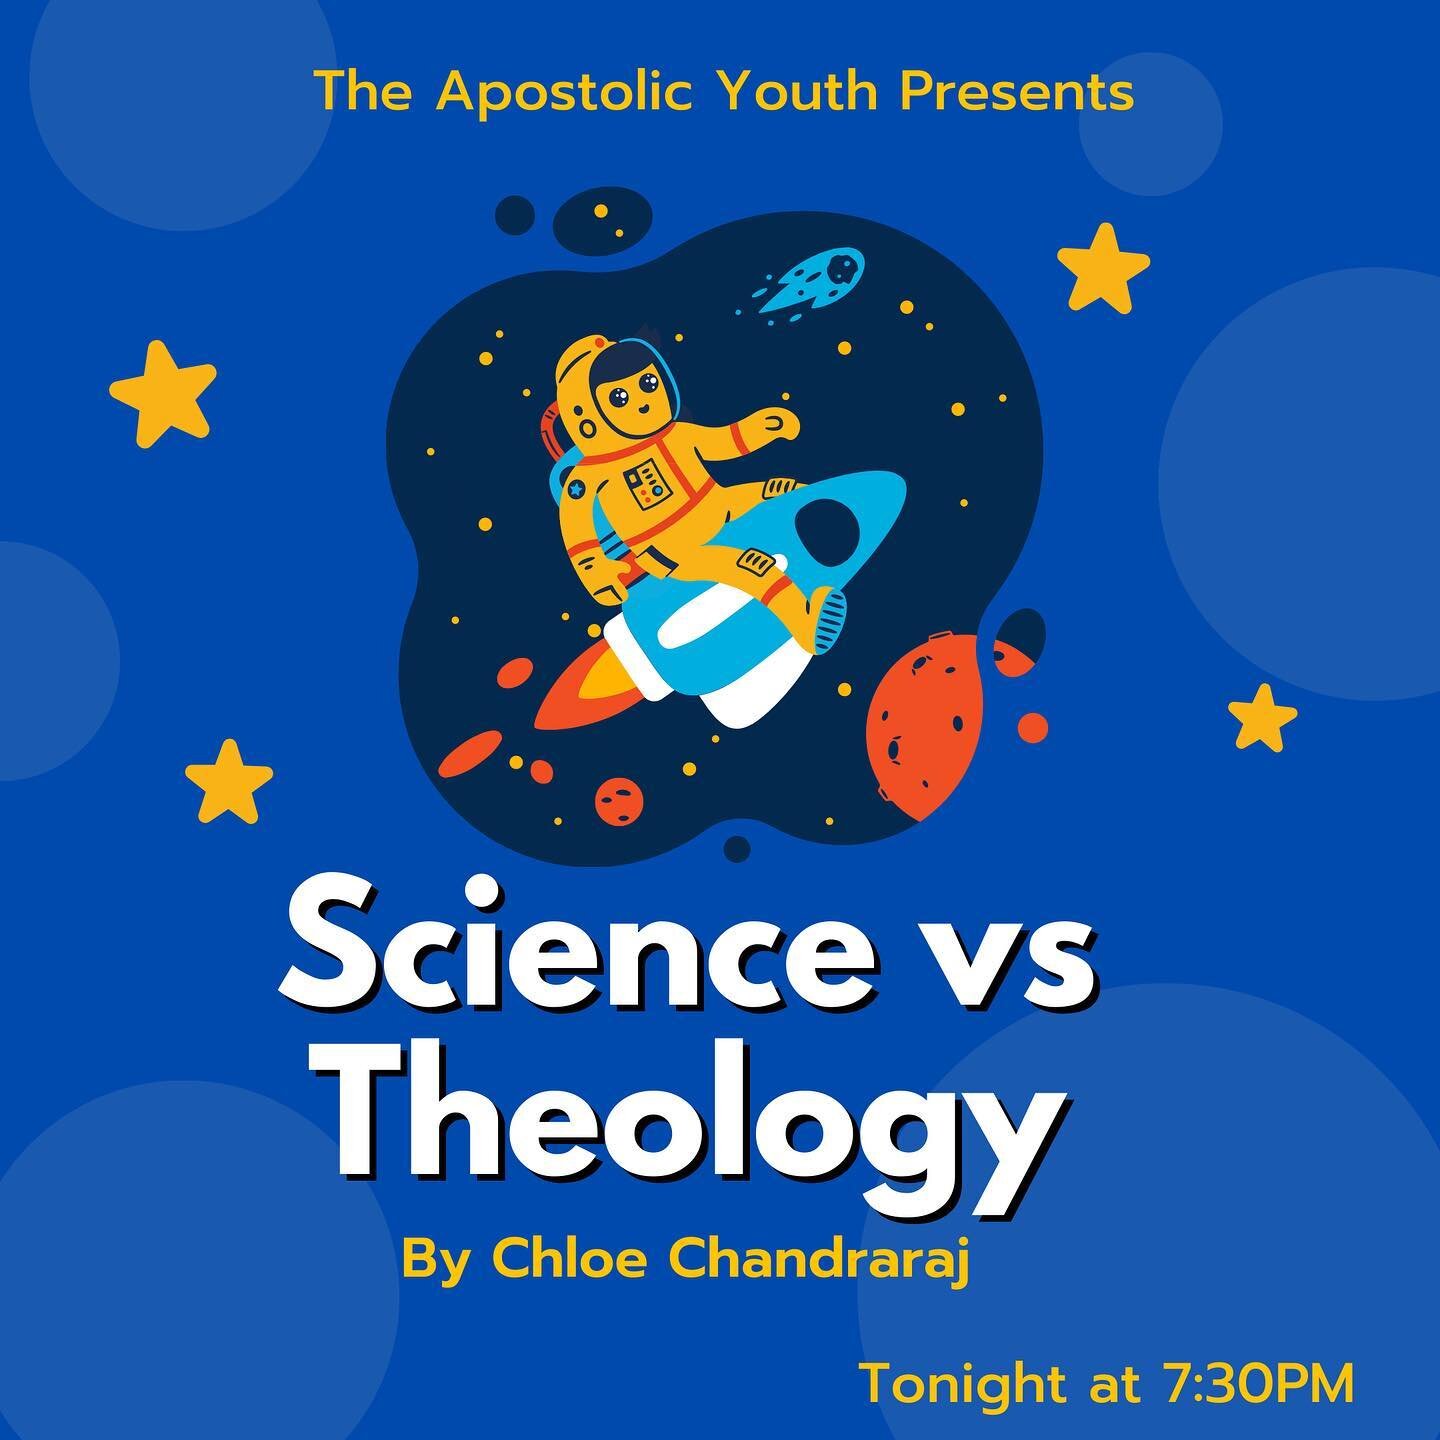 See you guys tonight at 7:30! -theapostolicyouth